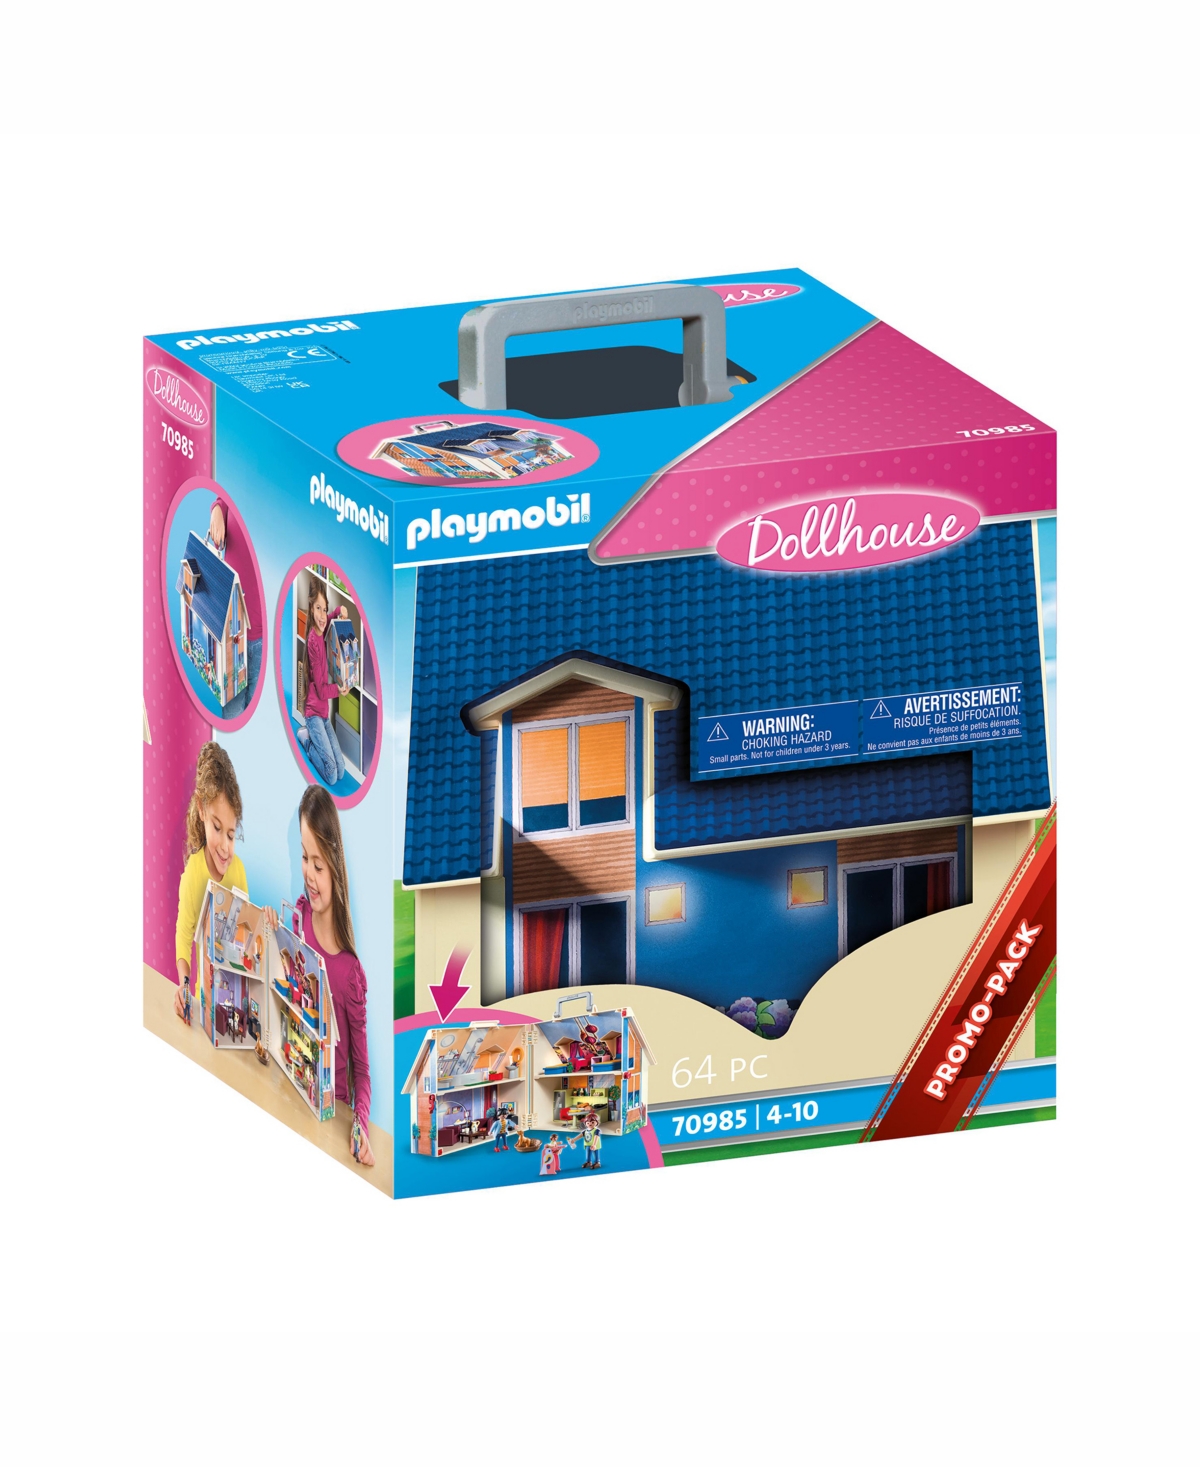 Playmobil Take Along Dollhouse In No Color